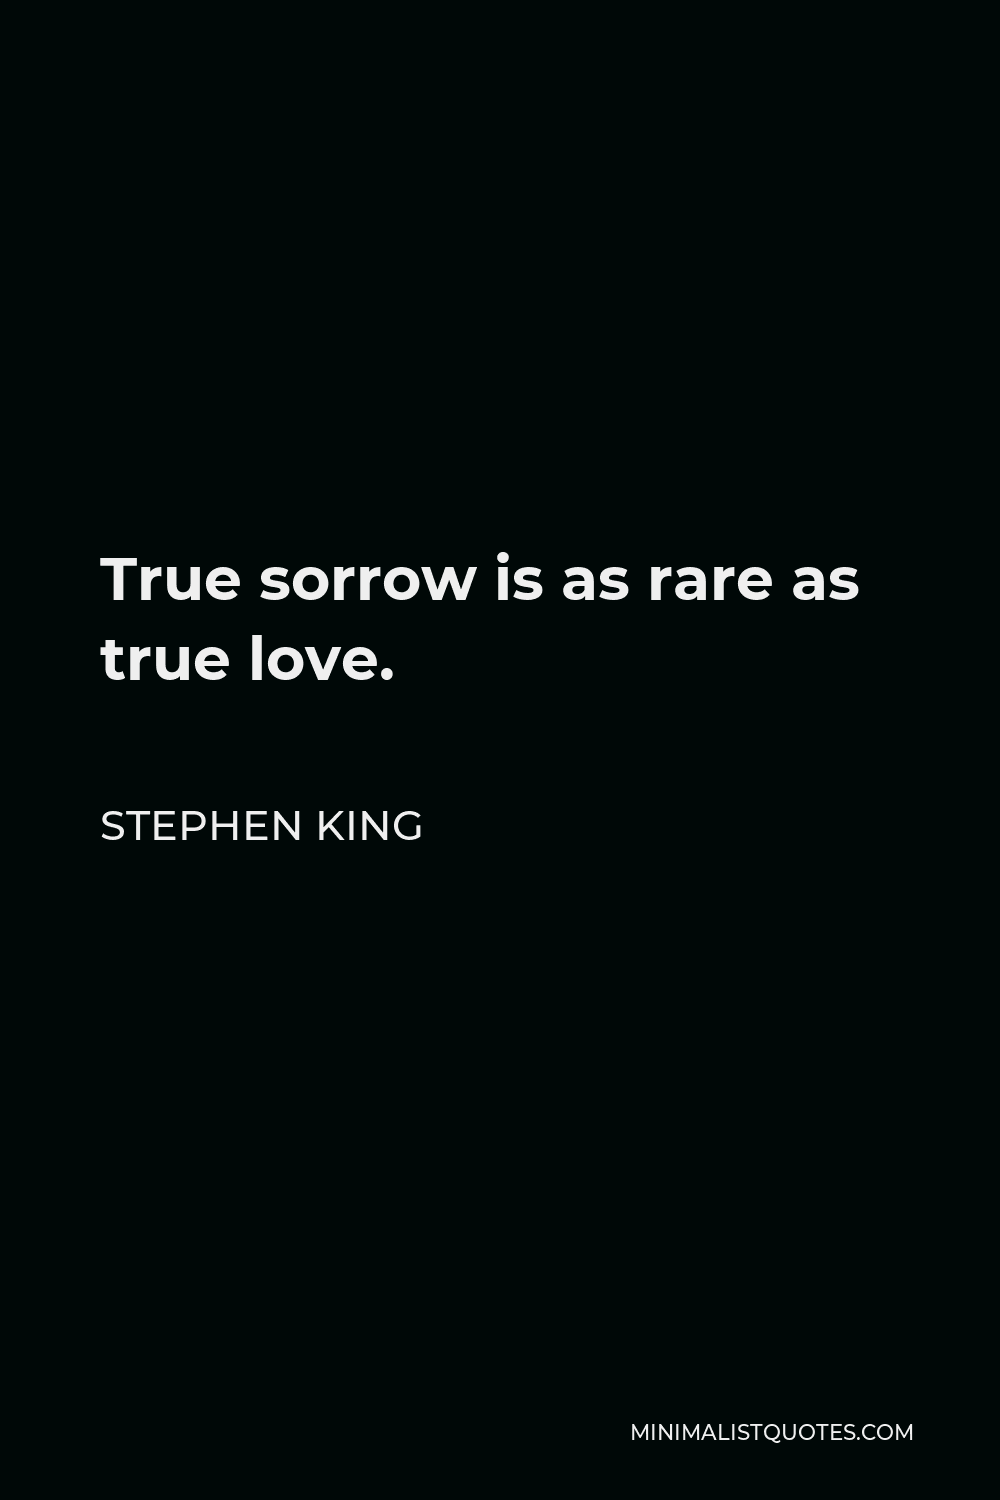 Stephen King Quote - True sorrow is as rare as true love.